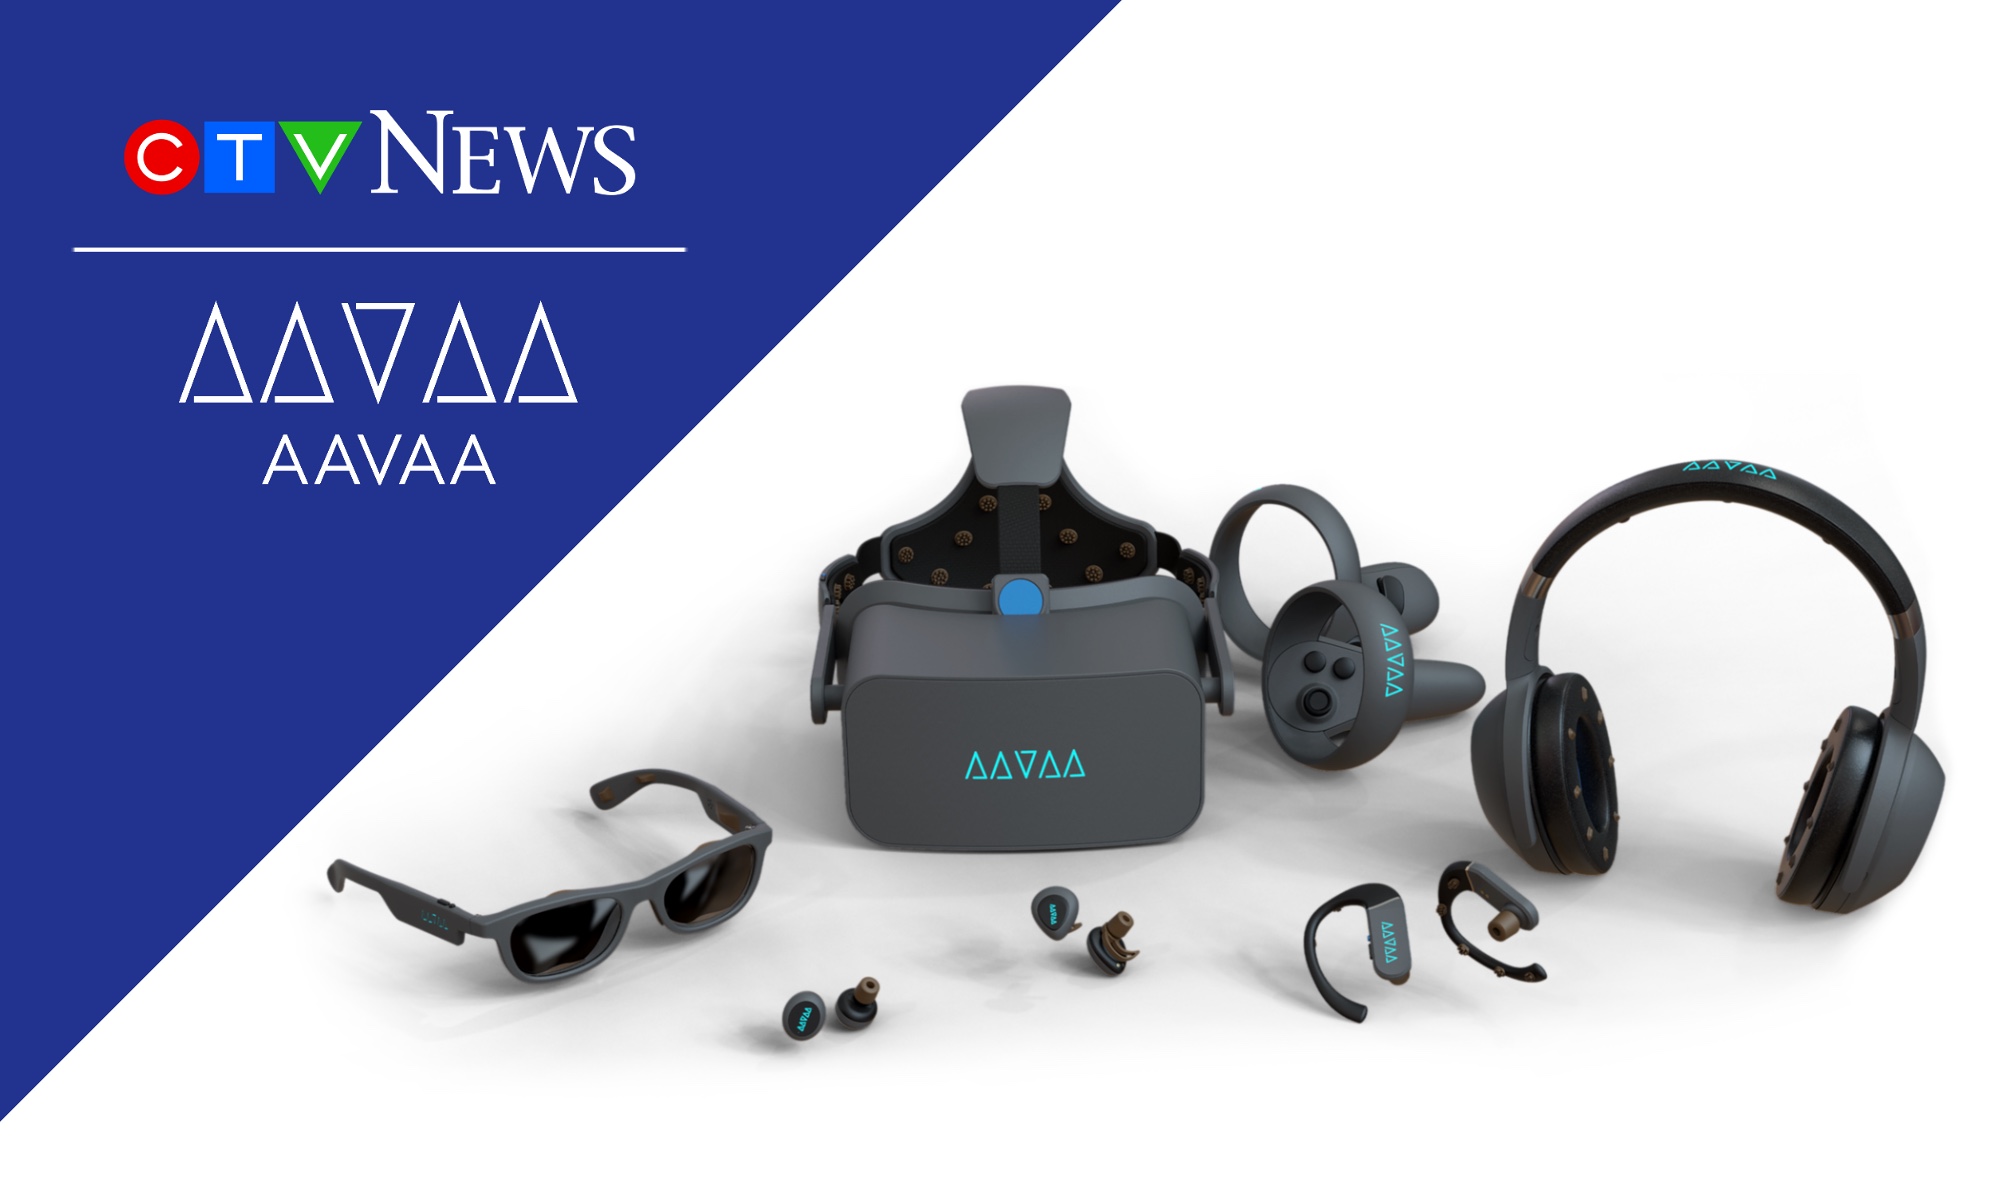 CTV News features AAVAA and their technology